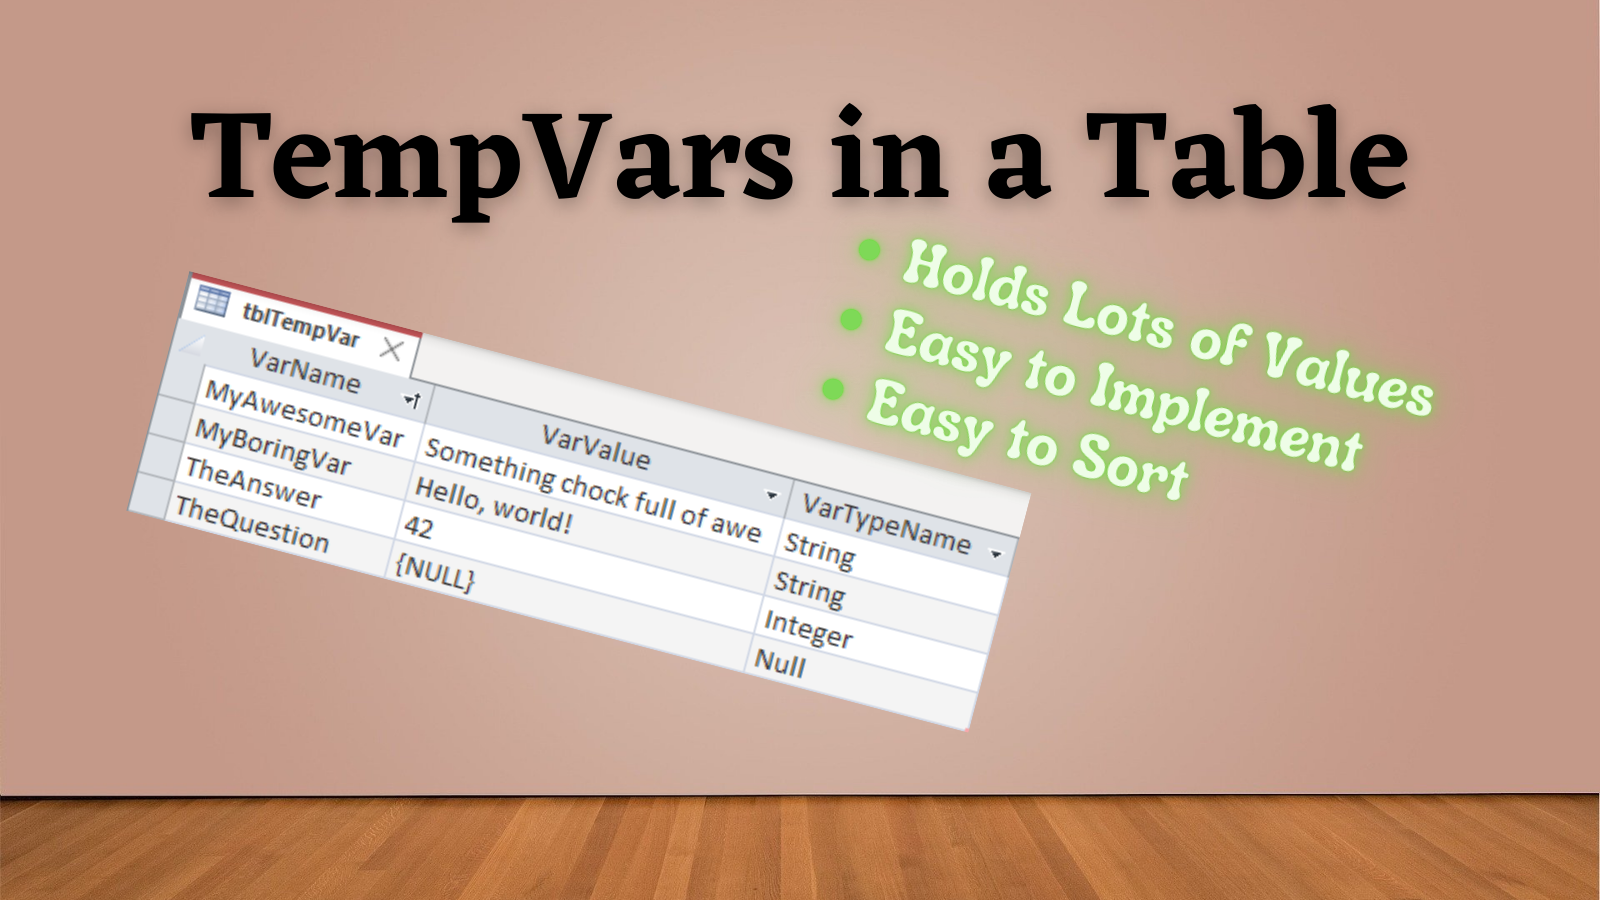 tblTempVar: Creating and Populating a Table of TempVars